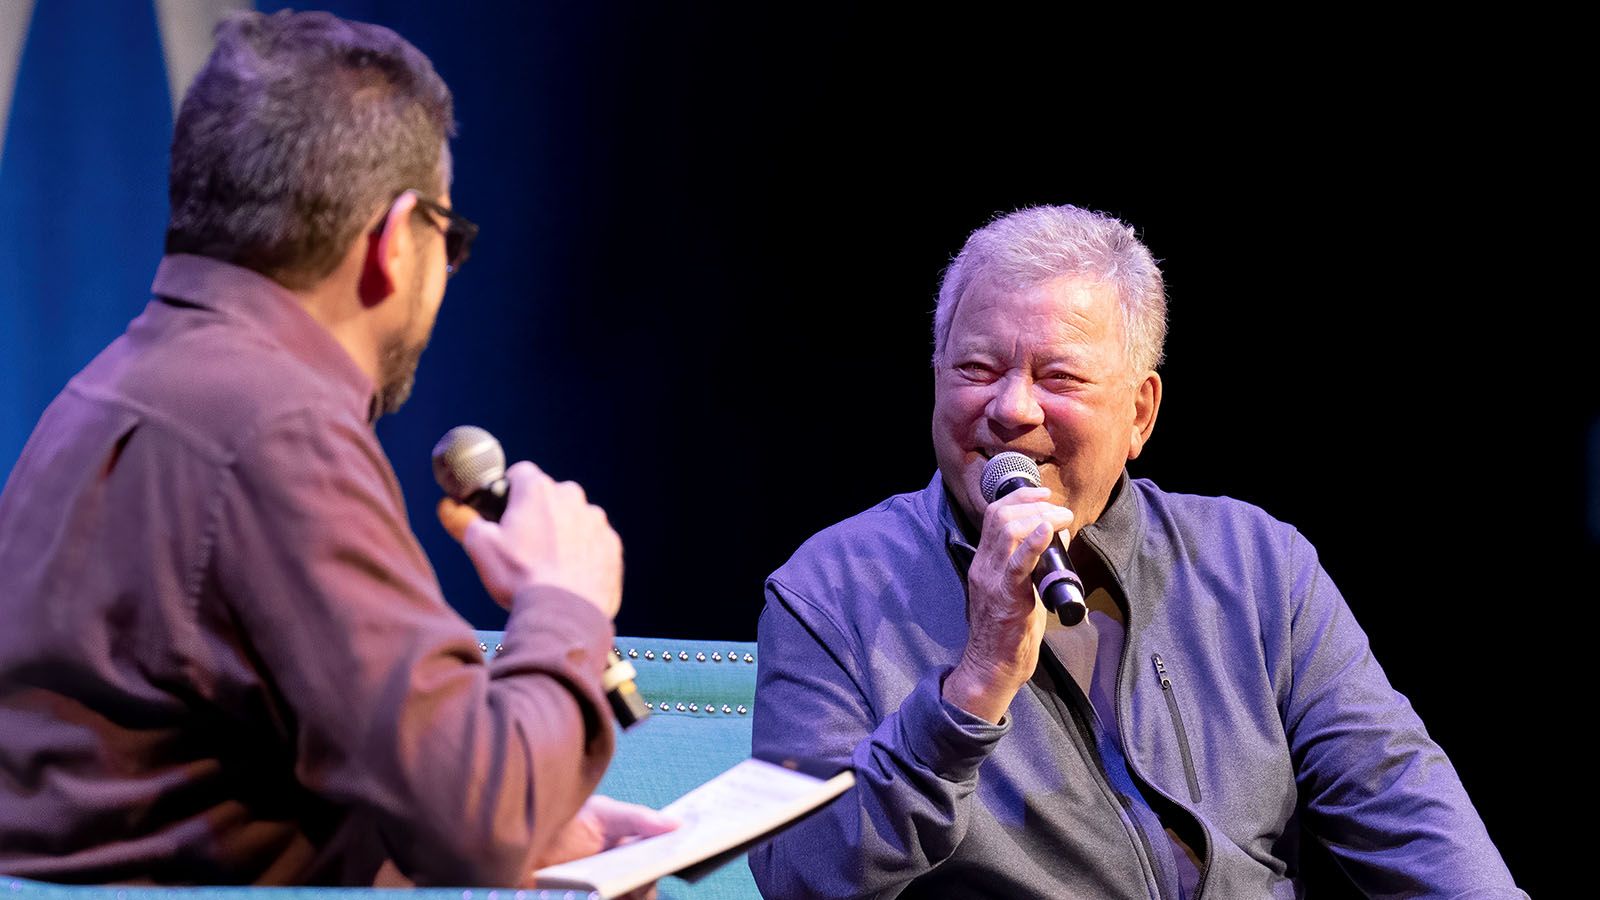 Following a screening of "Star Trek II: The Wrath of Khan" on Feb. 11, William Shatner will take part in a discussion at Embassy Theatre.